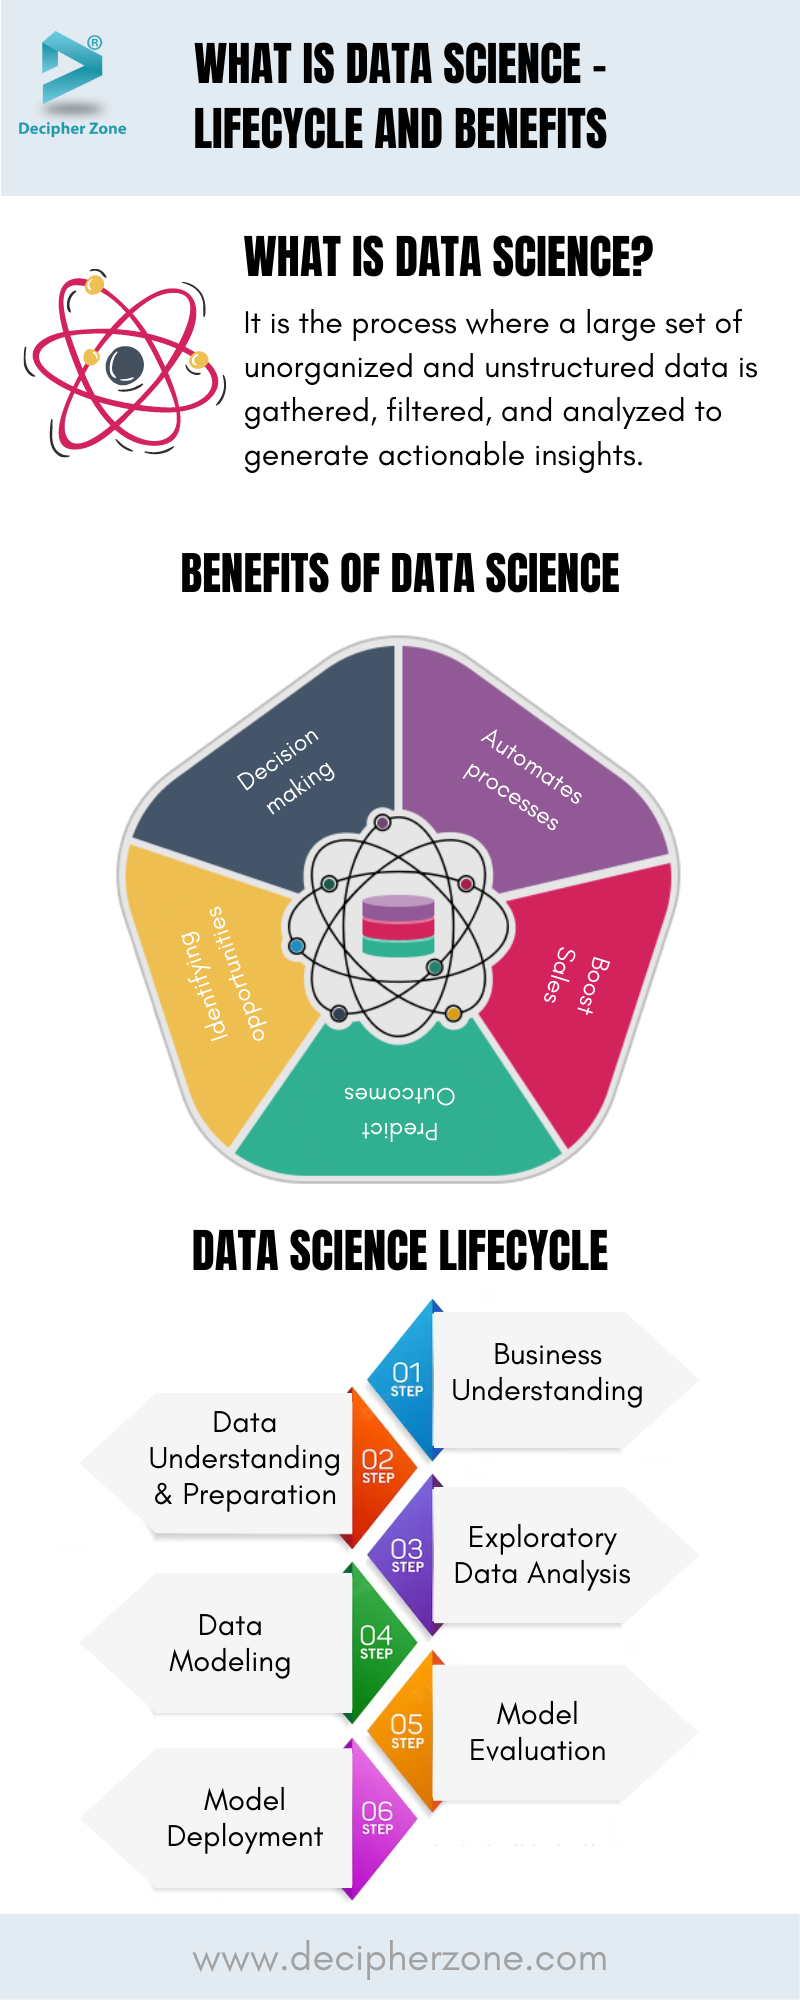 What is Data Science - LifeCycle, Benefits, and Tools